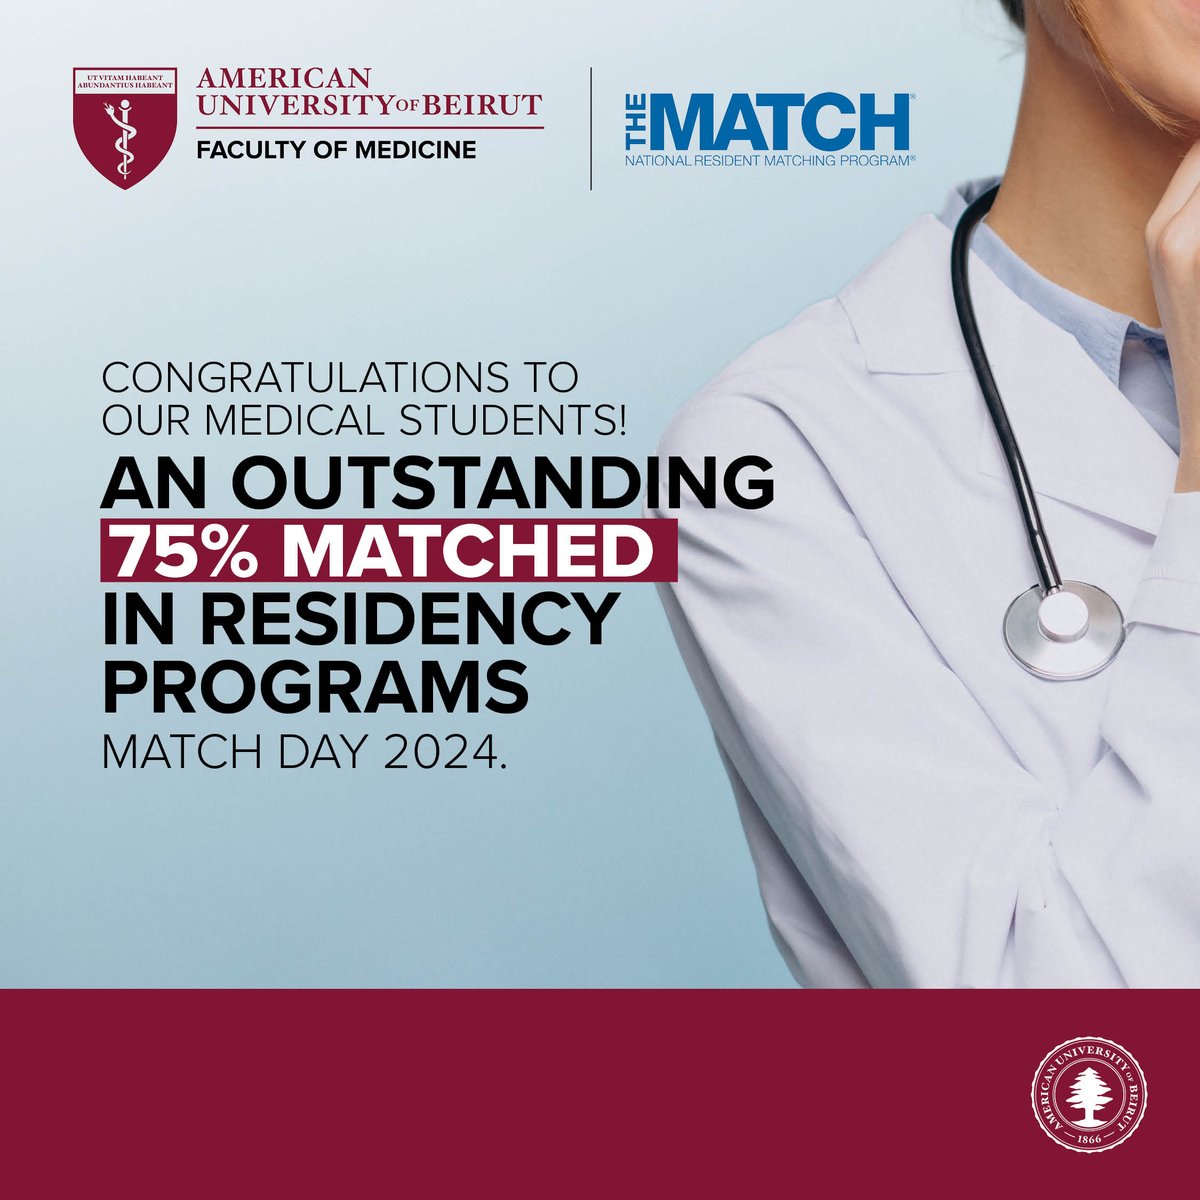 We are proud to share that 75% of our outstanding medical students have successfully matched with top residency programs on Match Day 2024! 🎉👩‍⚕️👨‍⚕️ Huge congratulations to each and every one of you on this remarkable achievement! 🌟 #MatchDay2024 #AUBProud #AUBMedicine #AUB